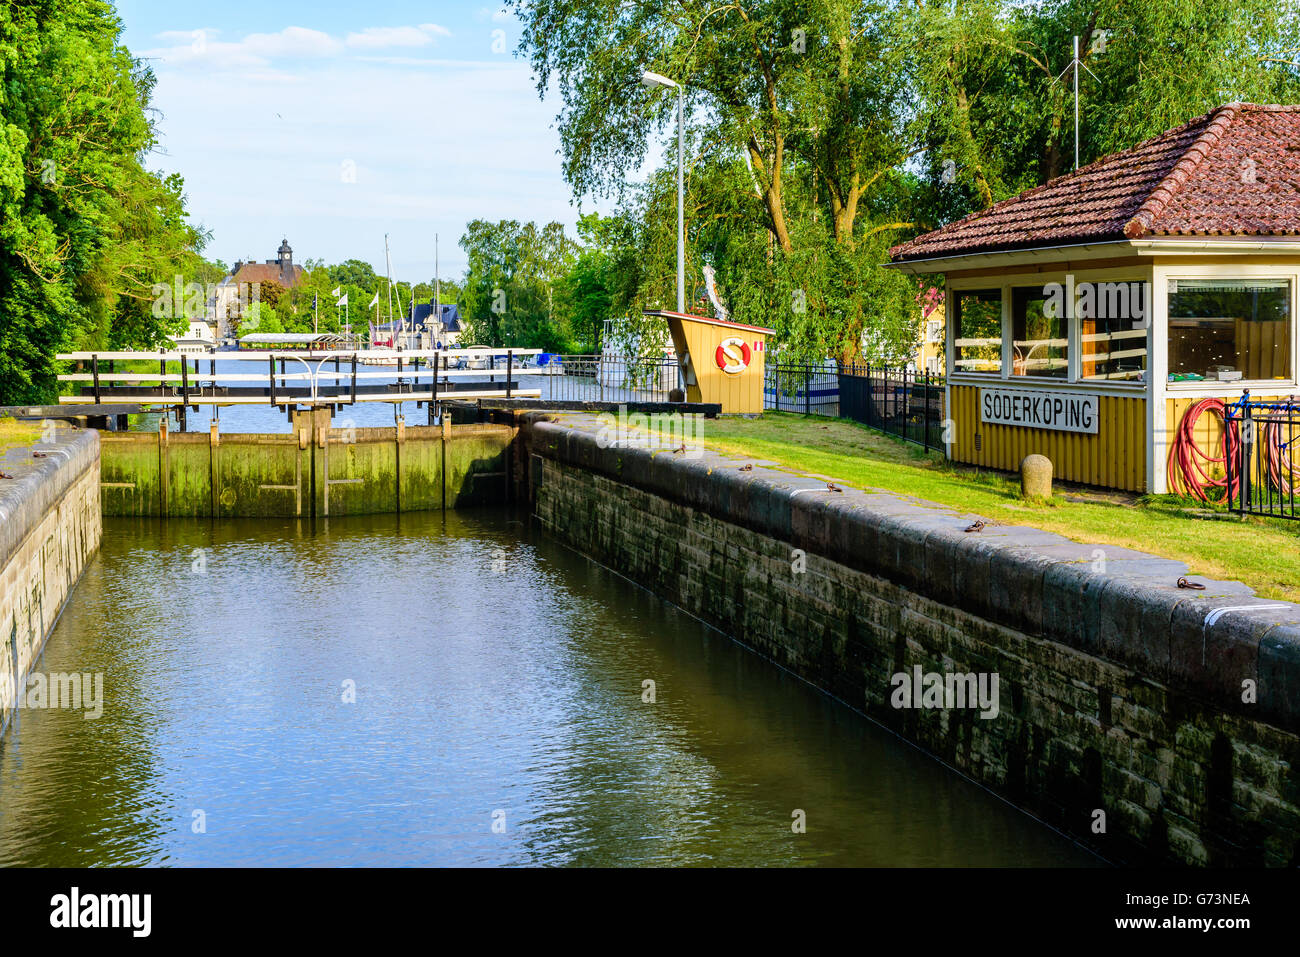 Soderkoping, Sweden - June 19, 2016: Gota canal at Soderkoping, Sweden. Closed canal lock with part of town and boats in the bac Stock Photo